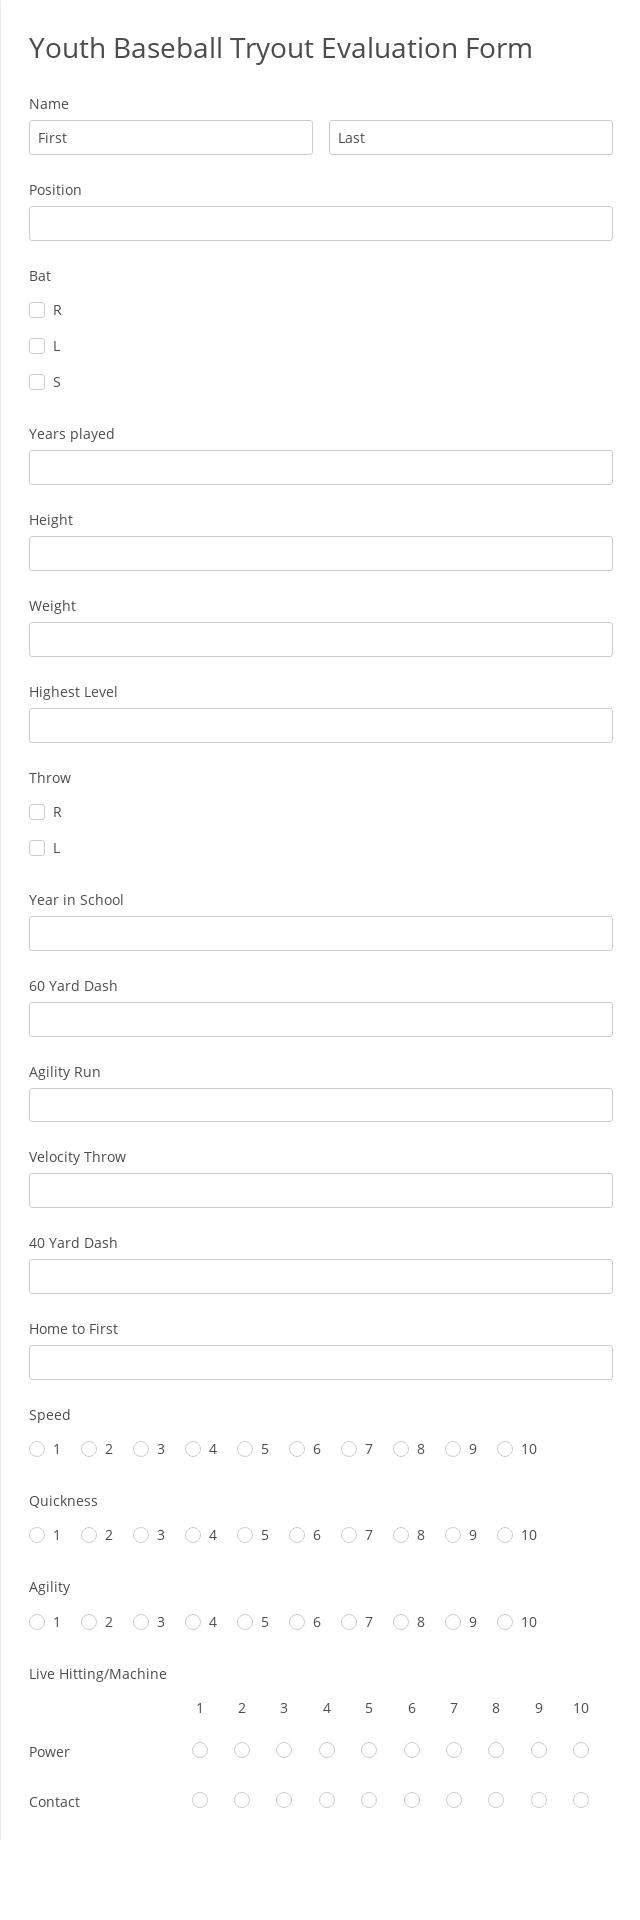 Youth Baseball Tryout Evaluation Form Template 123 Form Builder